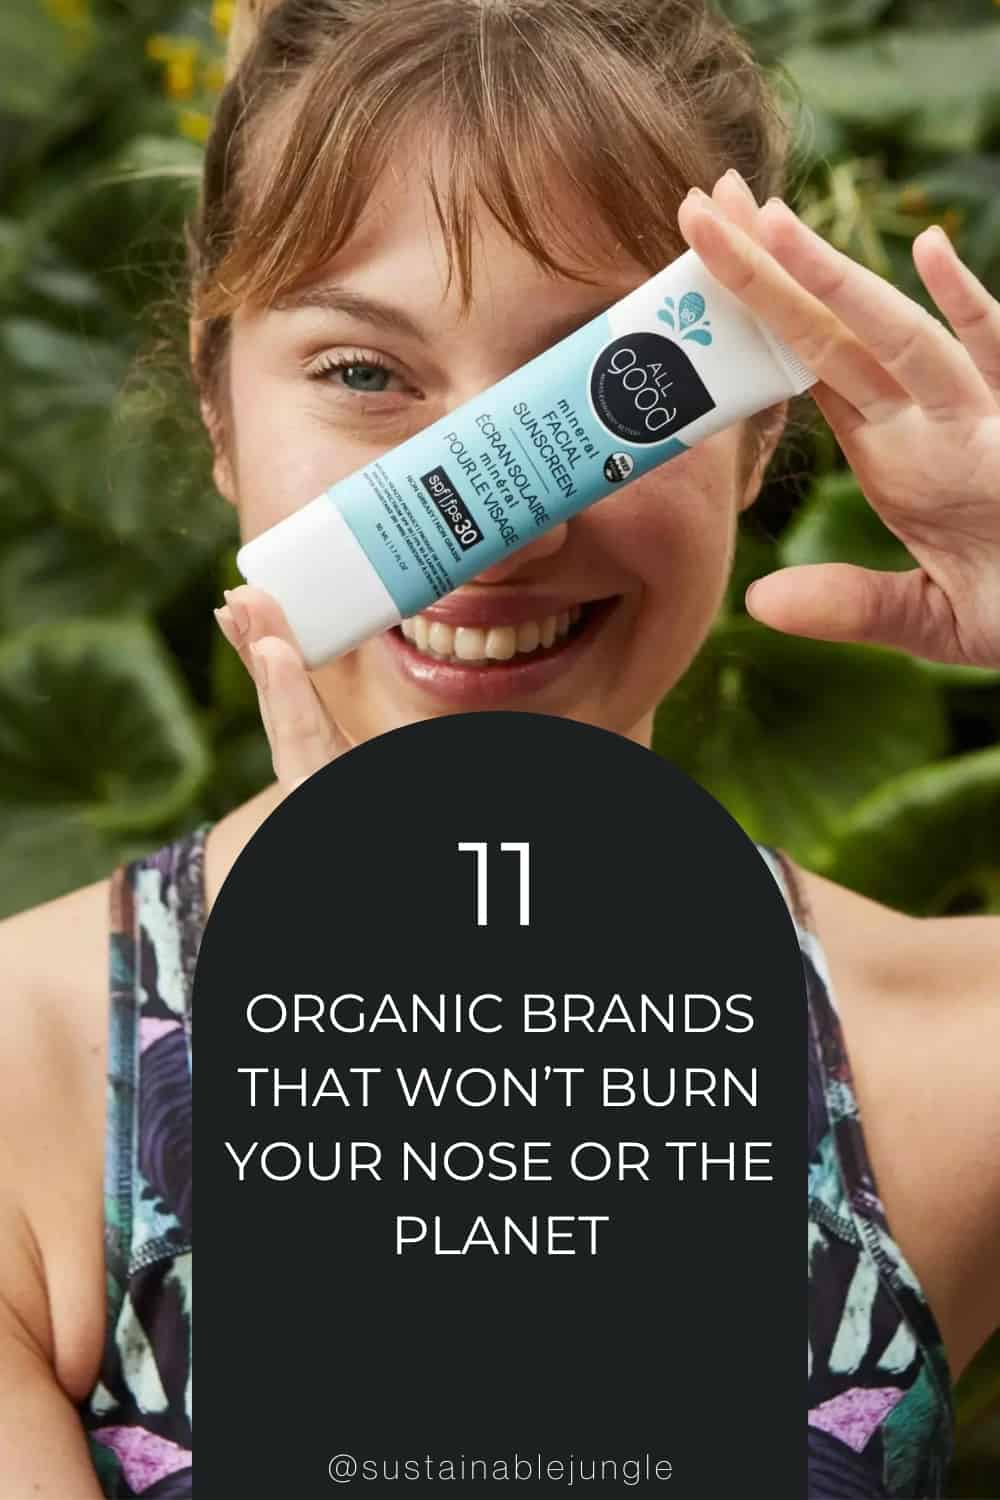 Natural Face Sunscreen: 11 Organic Brands That Won’t Burn Your Nose Or The Planet Image by All Good #naturalfacesunscreen #naturalfacialsunscreen #bestallnaturalscunscreenforface #organicfacesunscreen #organicfacialsunscreen #organicnaturalfacialsunscreen #sustainablejungle